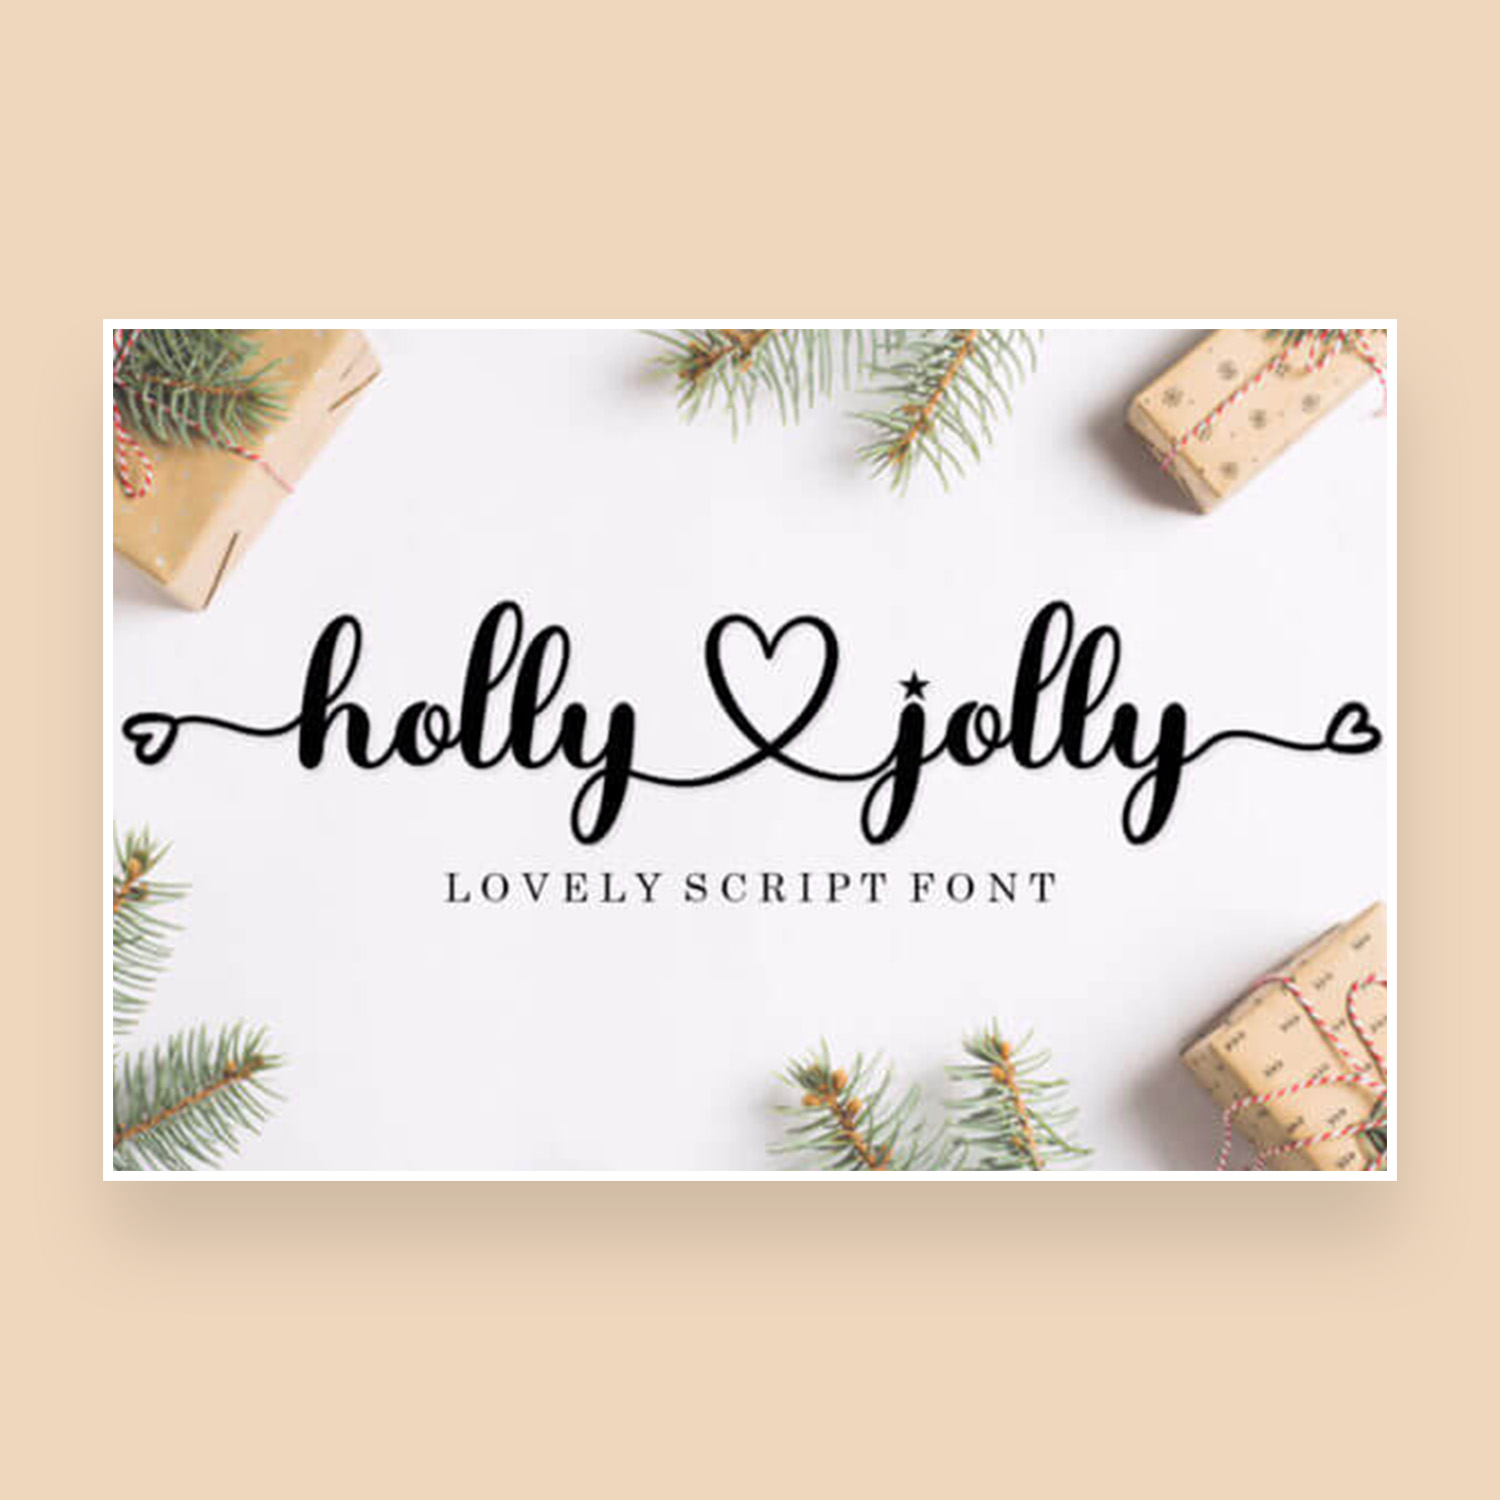 holly jolly romantic and sweet calligraphy font cover image.